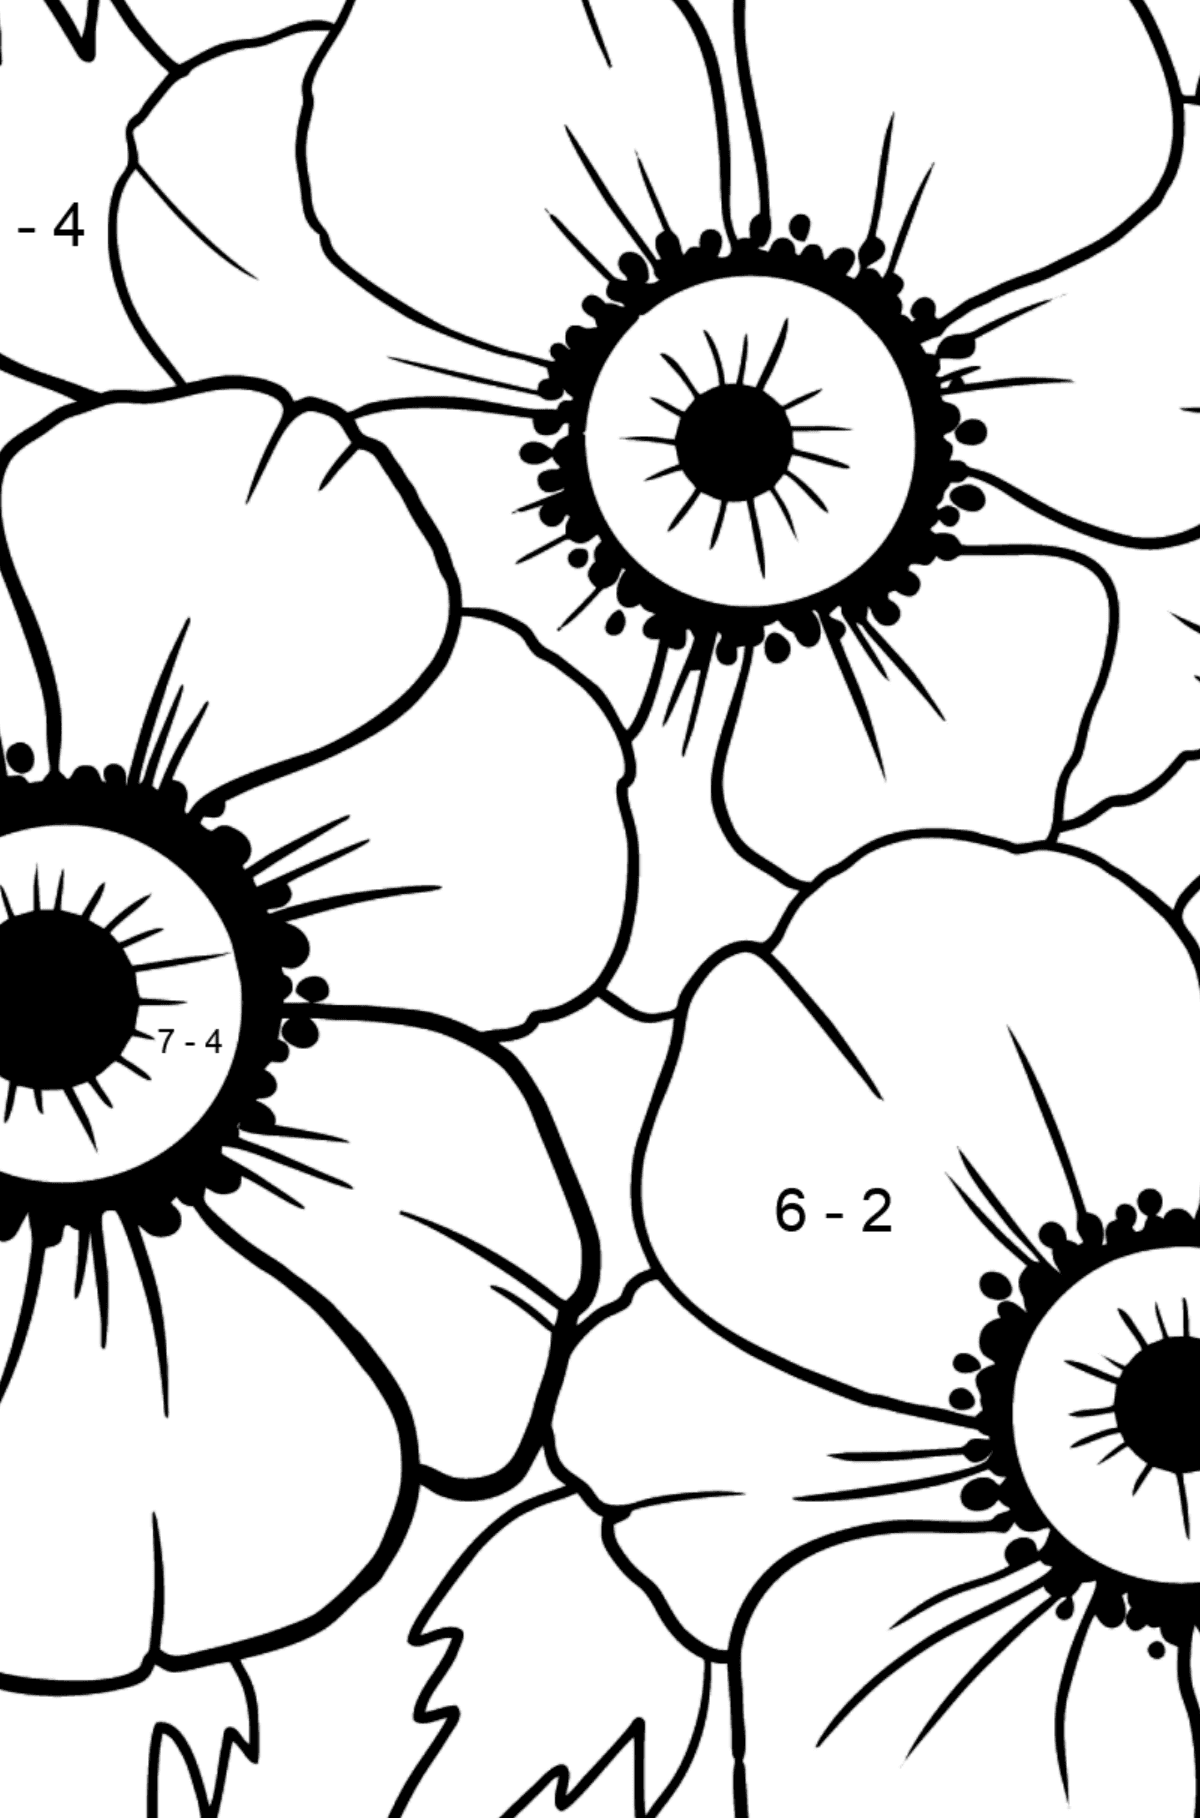 Coloring Page with big flower - A Red and Pink Anemone Coronaria - Math Coloring - Subtraction for Kids